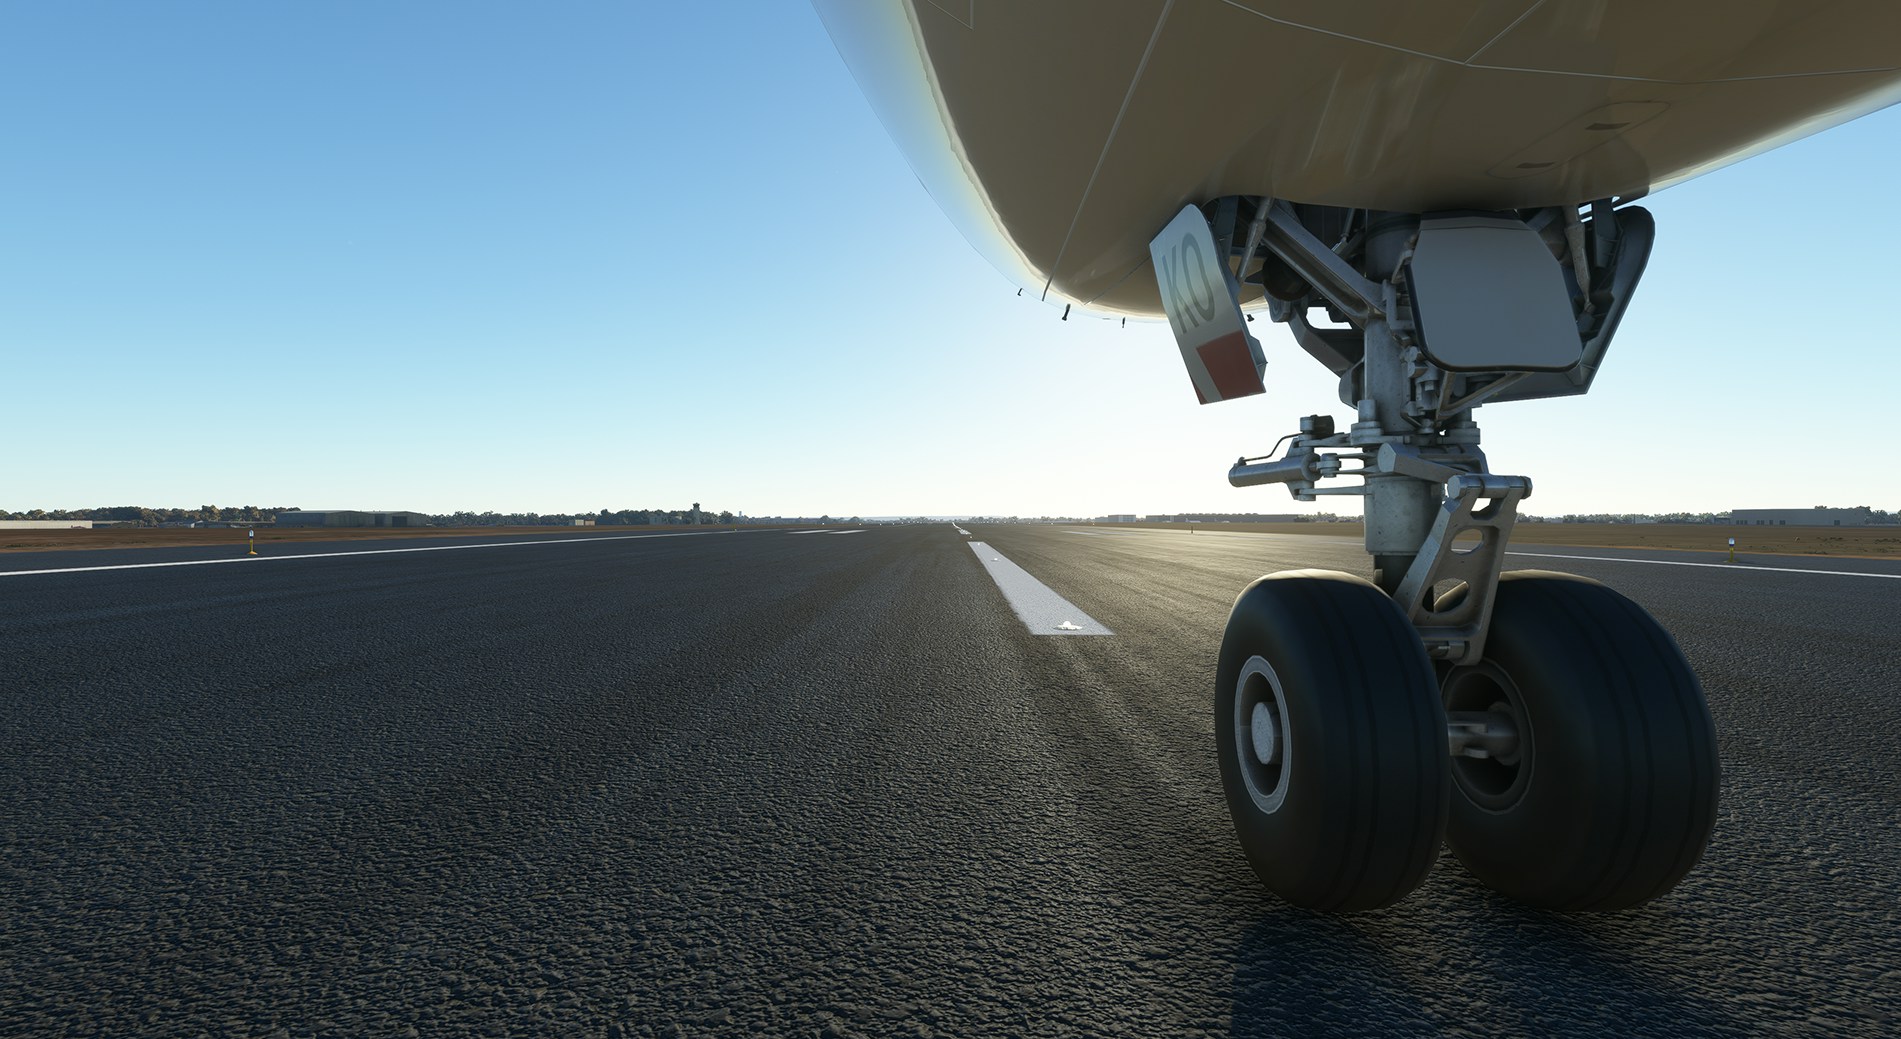 Aerosoft A330 for MSFS Gets New External and Internal Previews; On Track for Releasing this Year